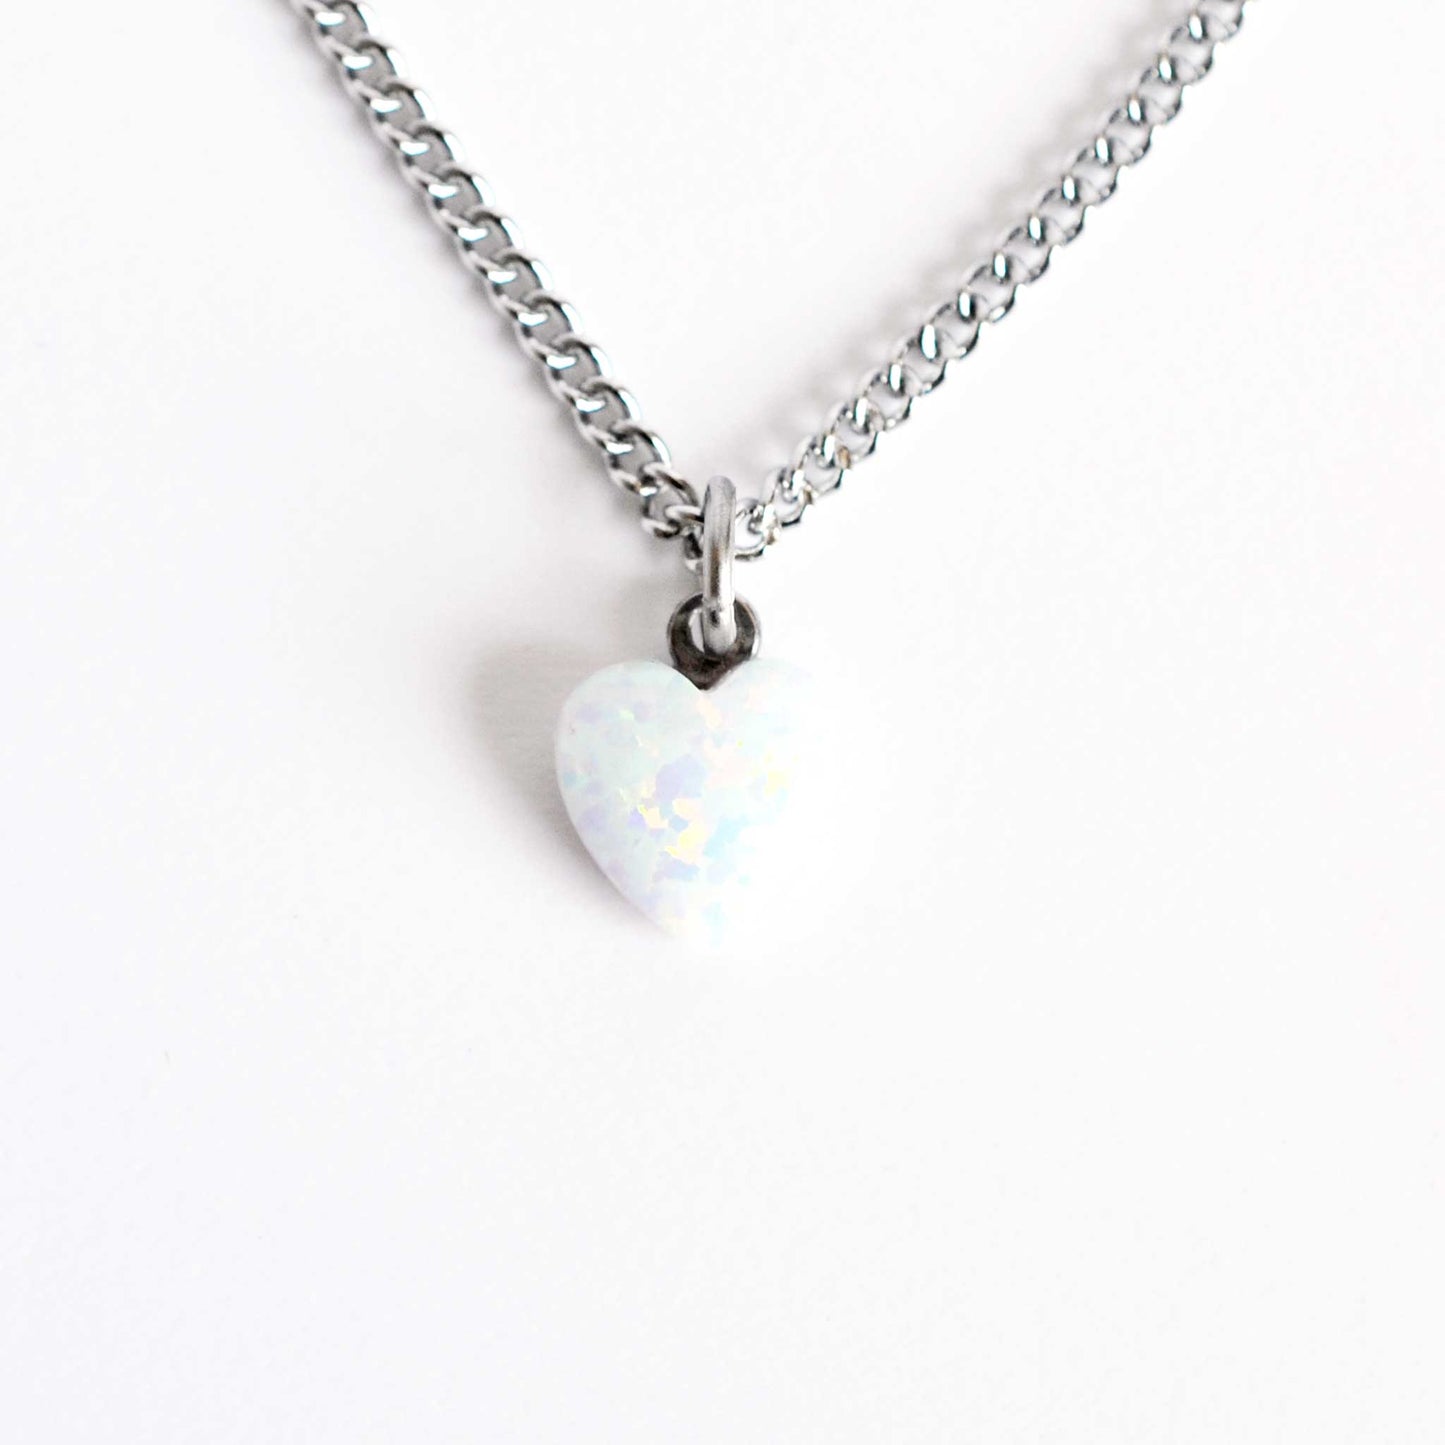 White Opal heart pendant necklace on stainless steel chain